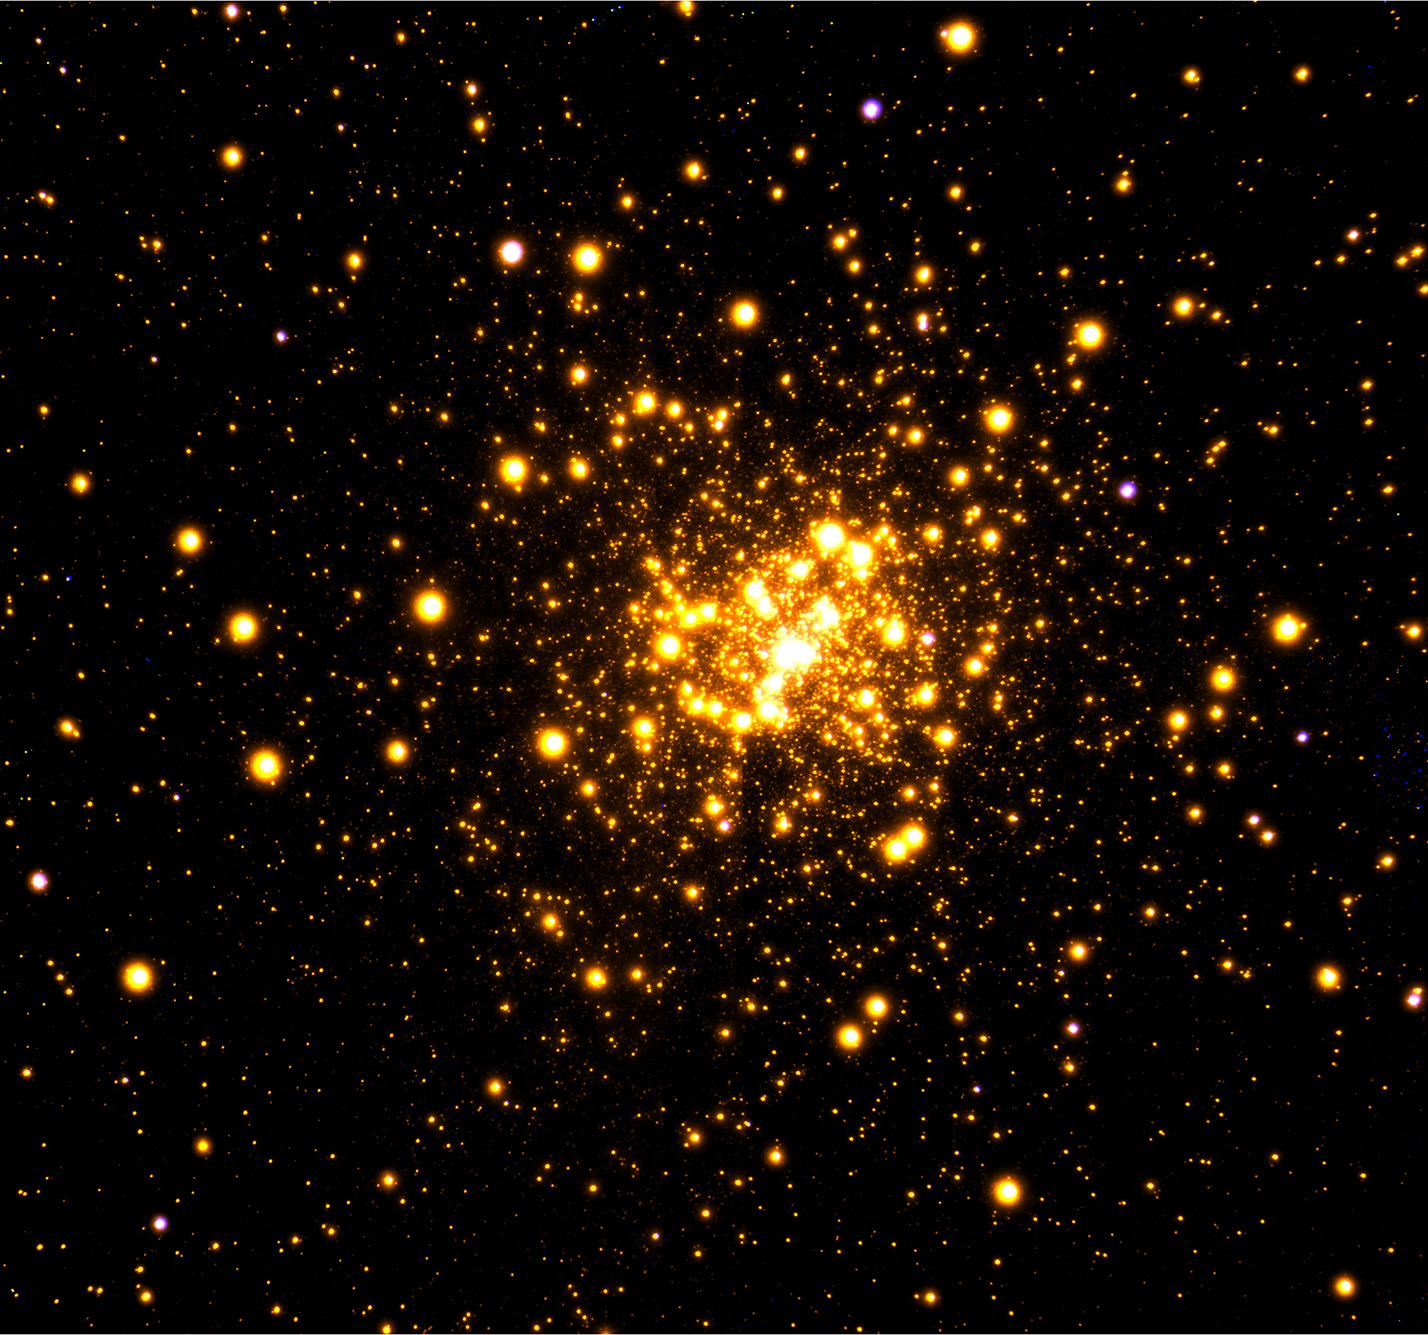 Gemini Observatory near-infrared image of the globular cluster Liller 1 obtained with the GeMS adaptive optics system on the Gemini South telescope in Chile.